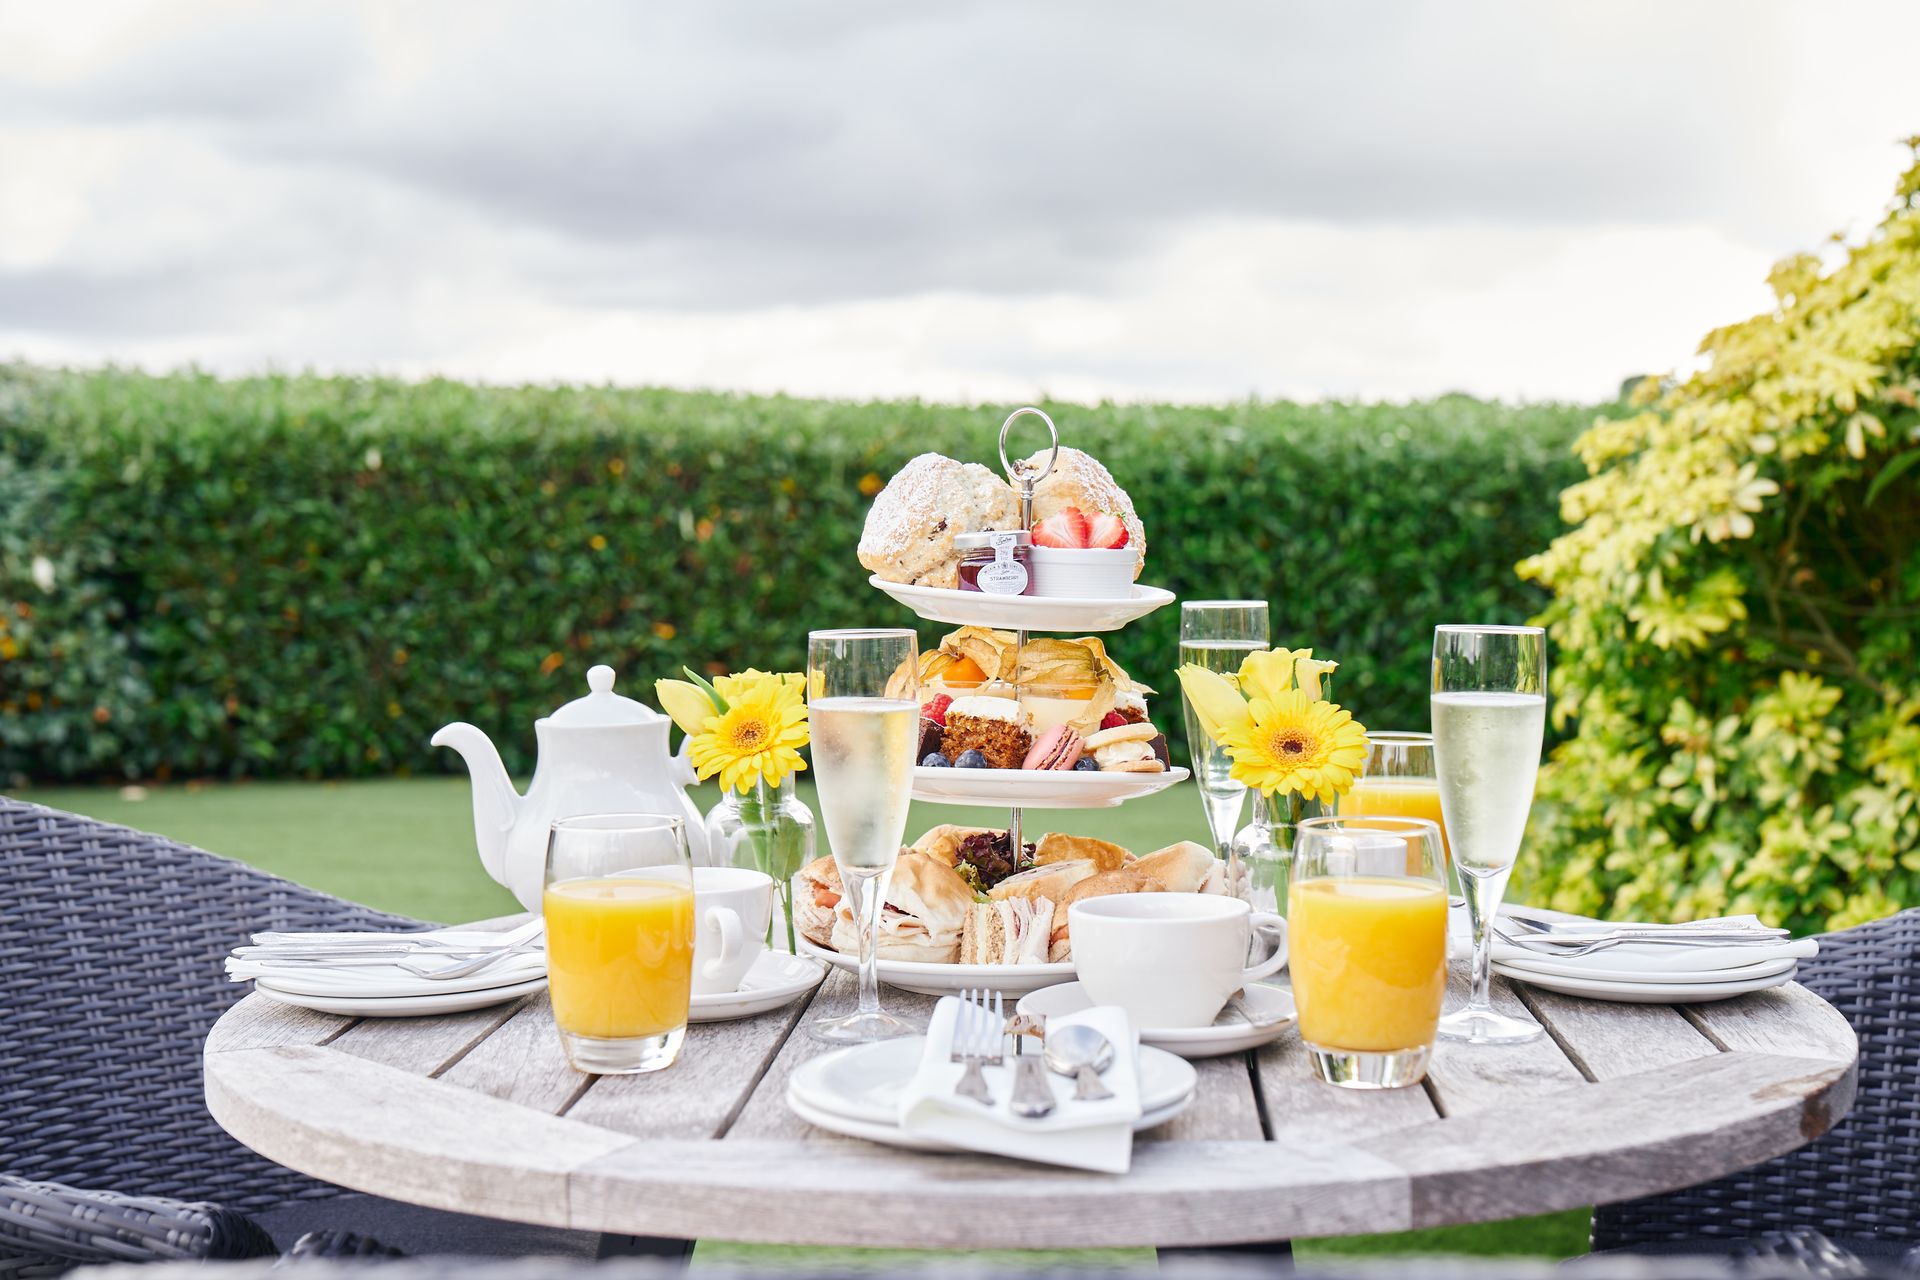 Afternoon Tea Venues In Lancashire The Wrightington Hotel Health Club And Spa